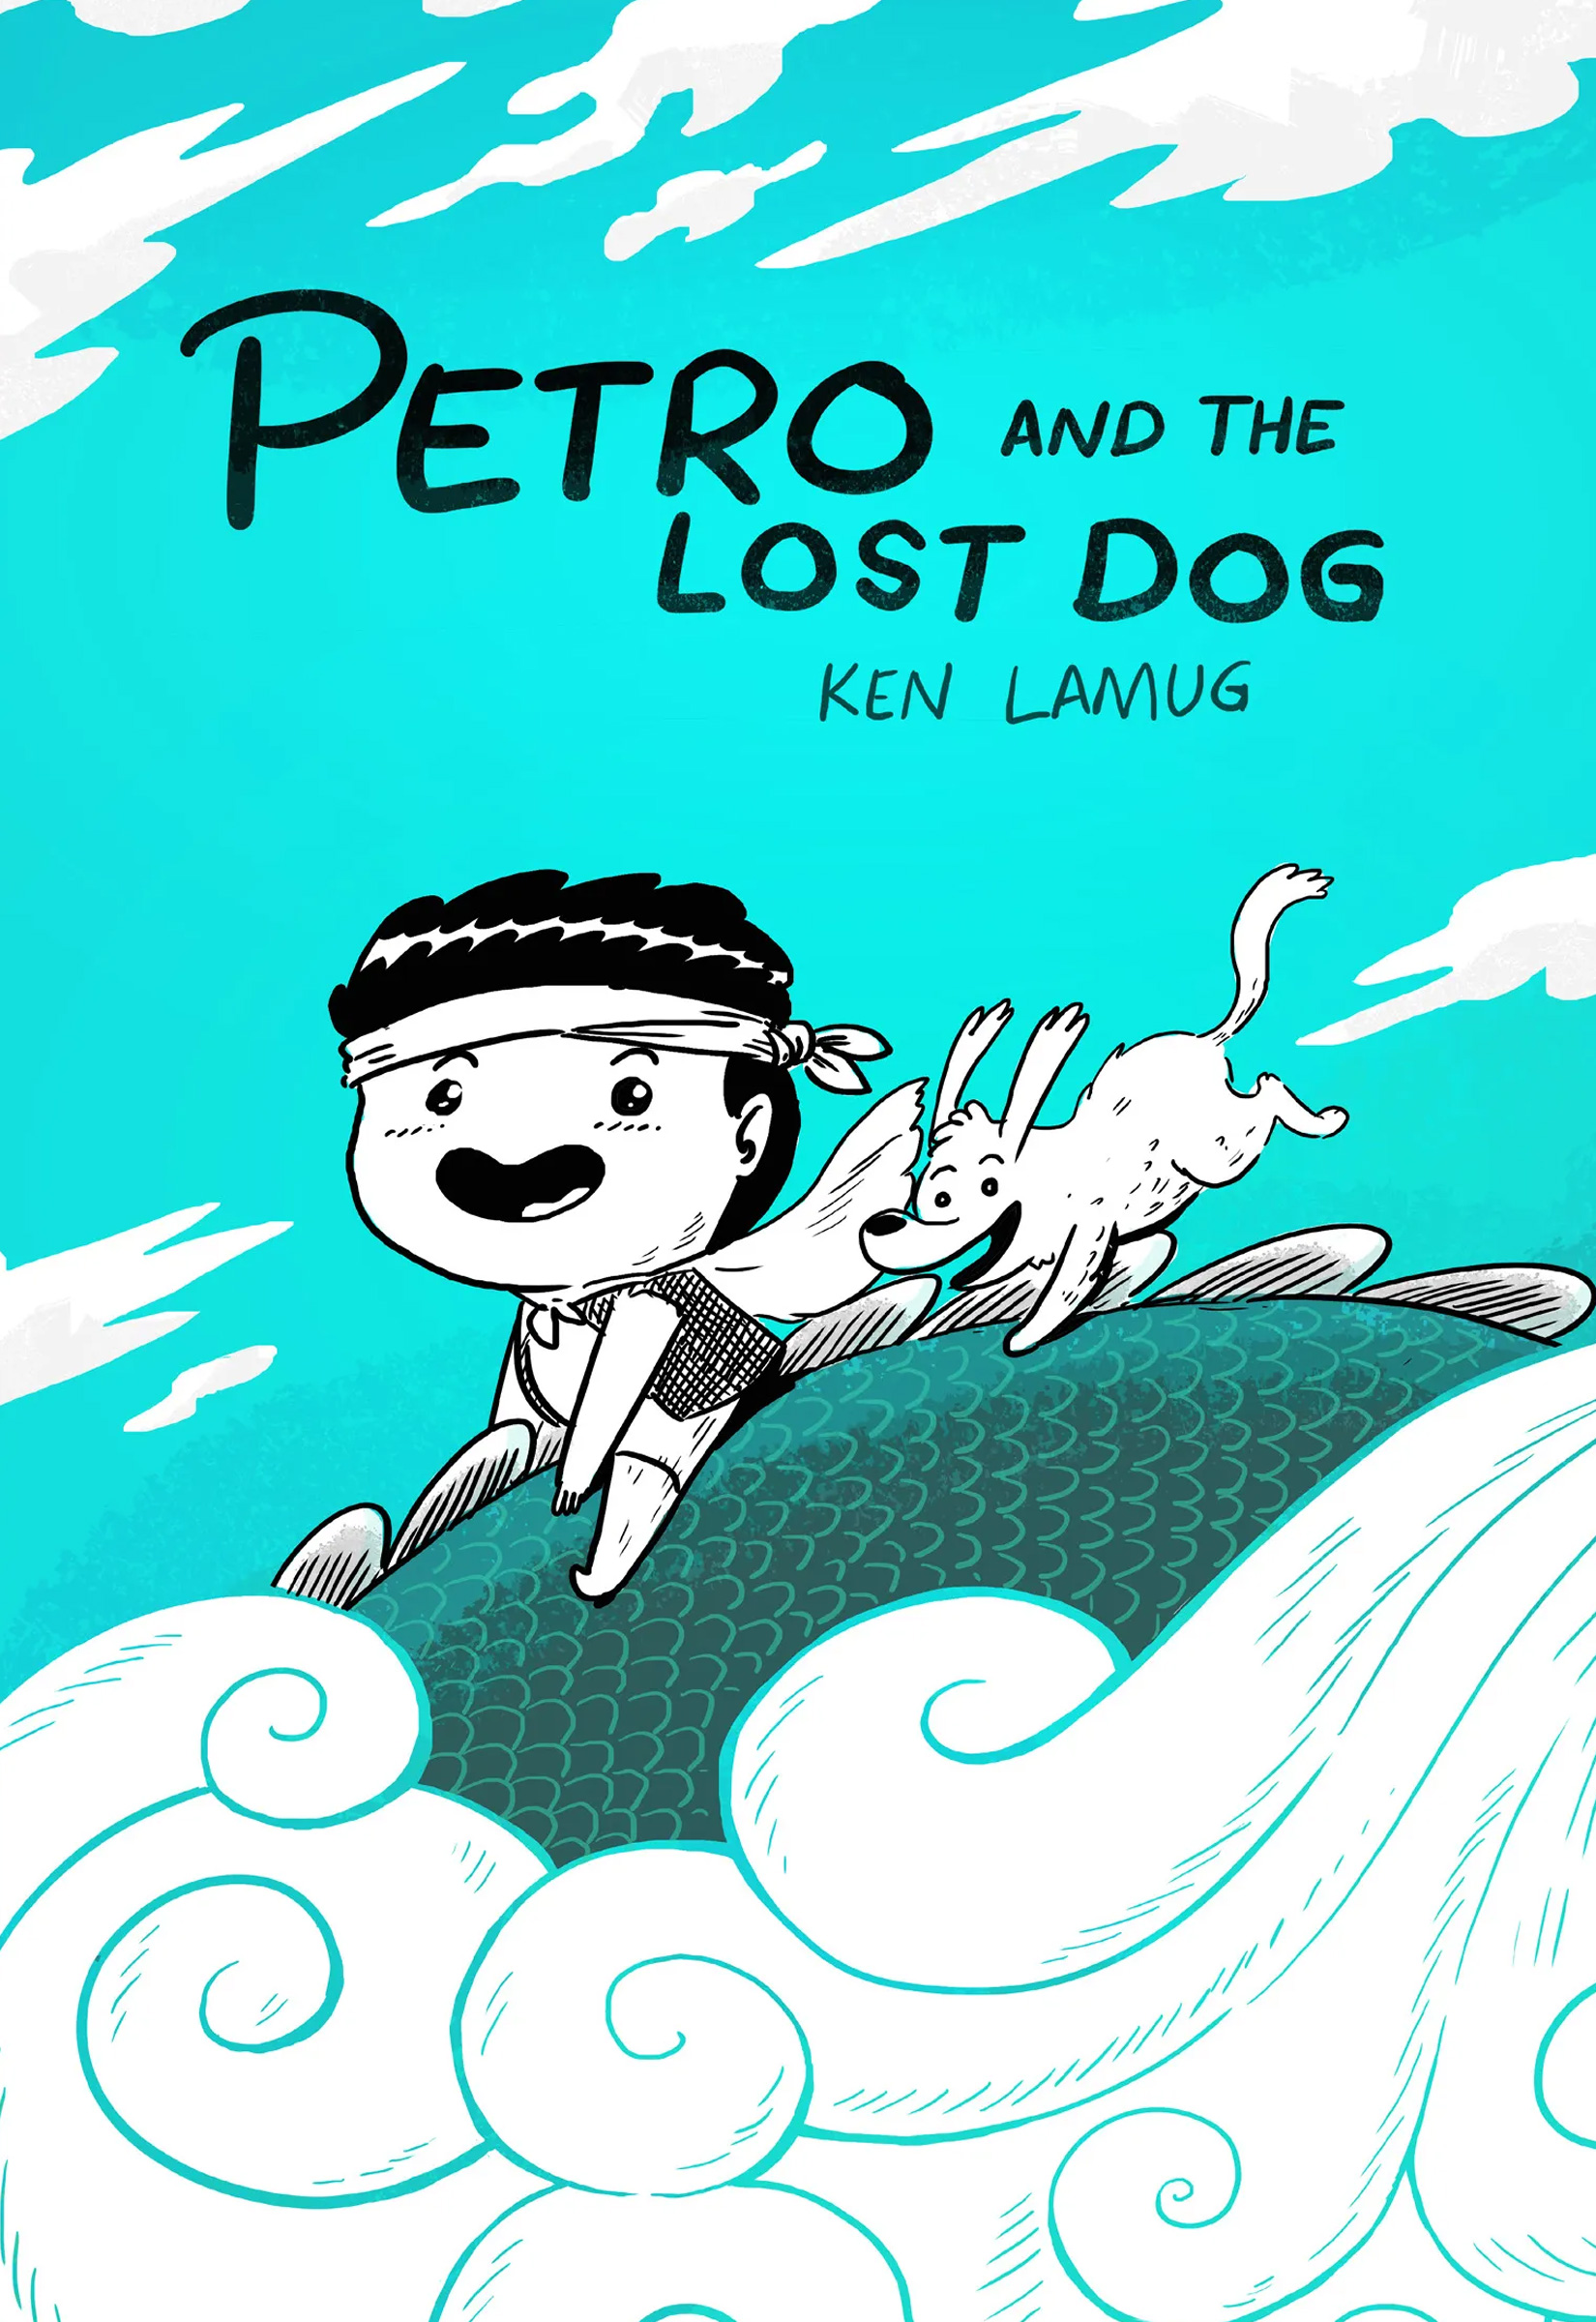 Petro and The Lost Dog books are shipping out just in time to fill your holiday stockings!